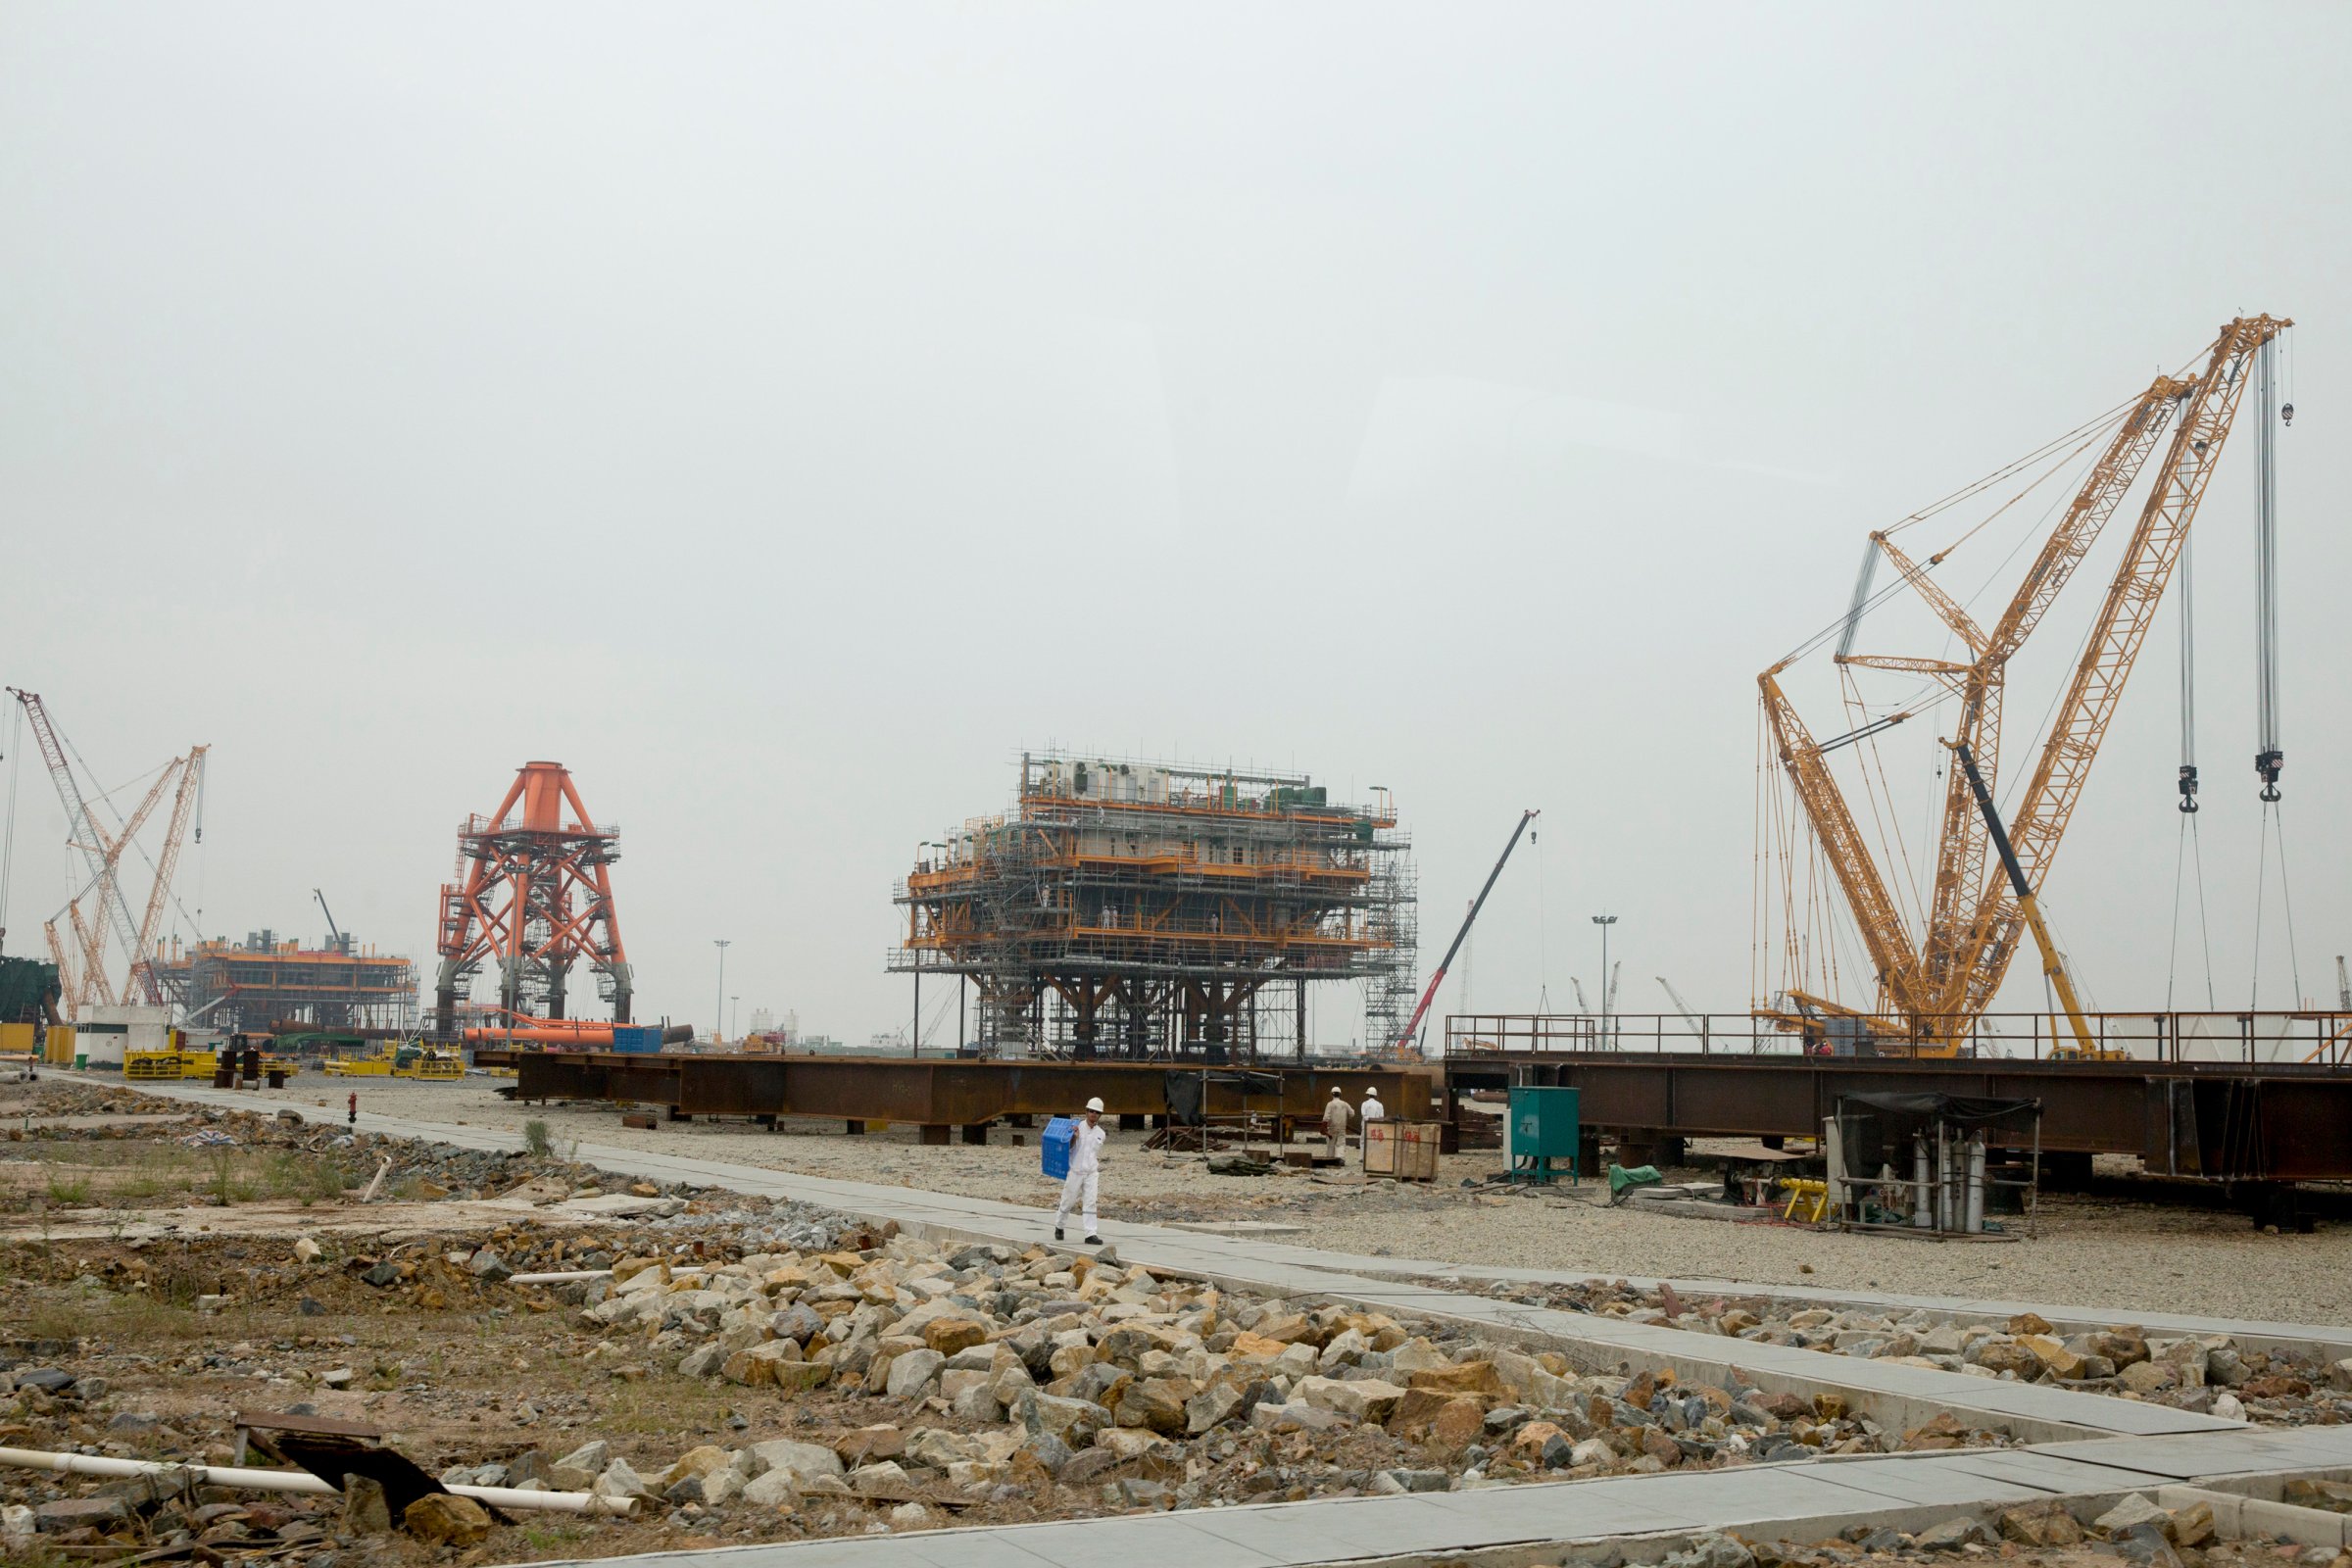 Cranes stand on a drilling platform construction site at the yard of Offshore Oil Engineering Co., a unit of CNOOC Ltd., in the Zhuhai Gaolan Port Economic Zone in Zhuhai, Guangdong province, China on Nov. 13, 2014.